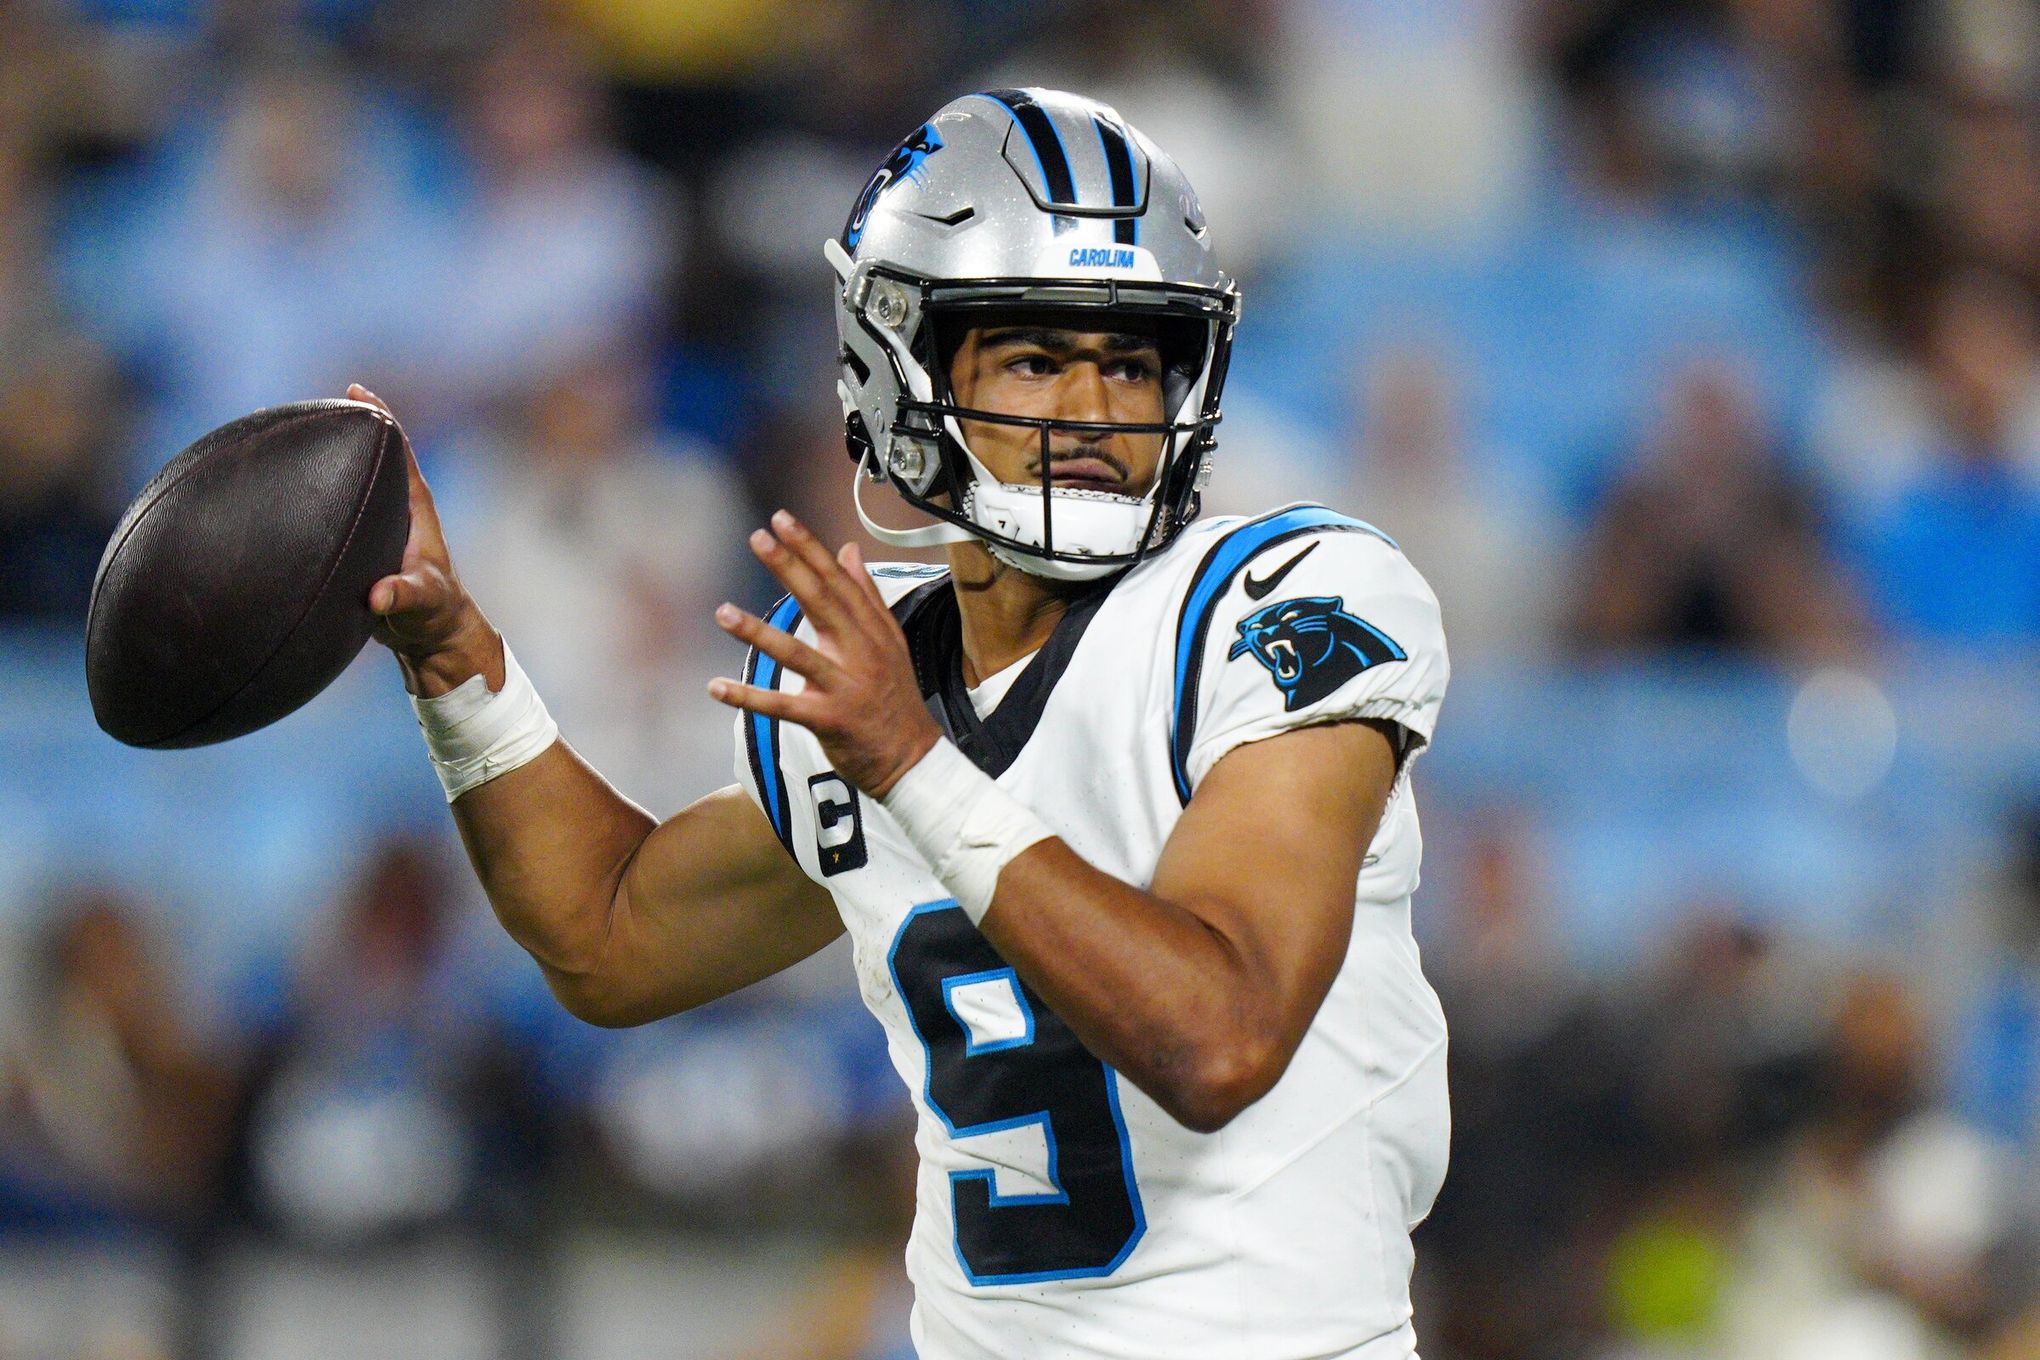 What to know about the Seahawks' Week 3 opponent, the Carolina Panthers